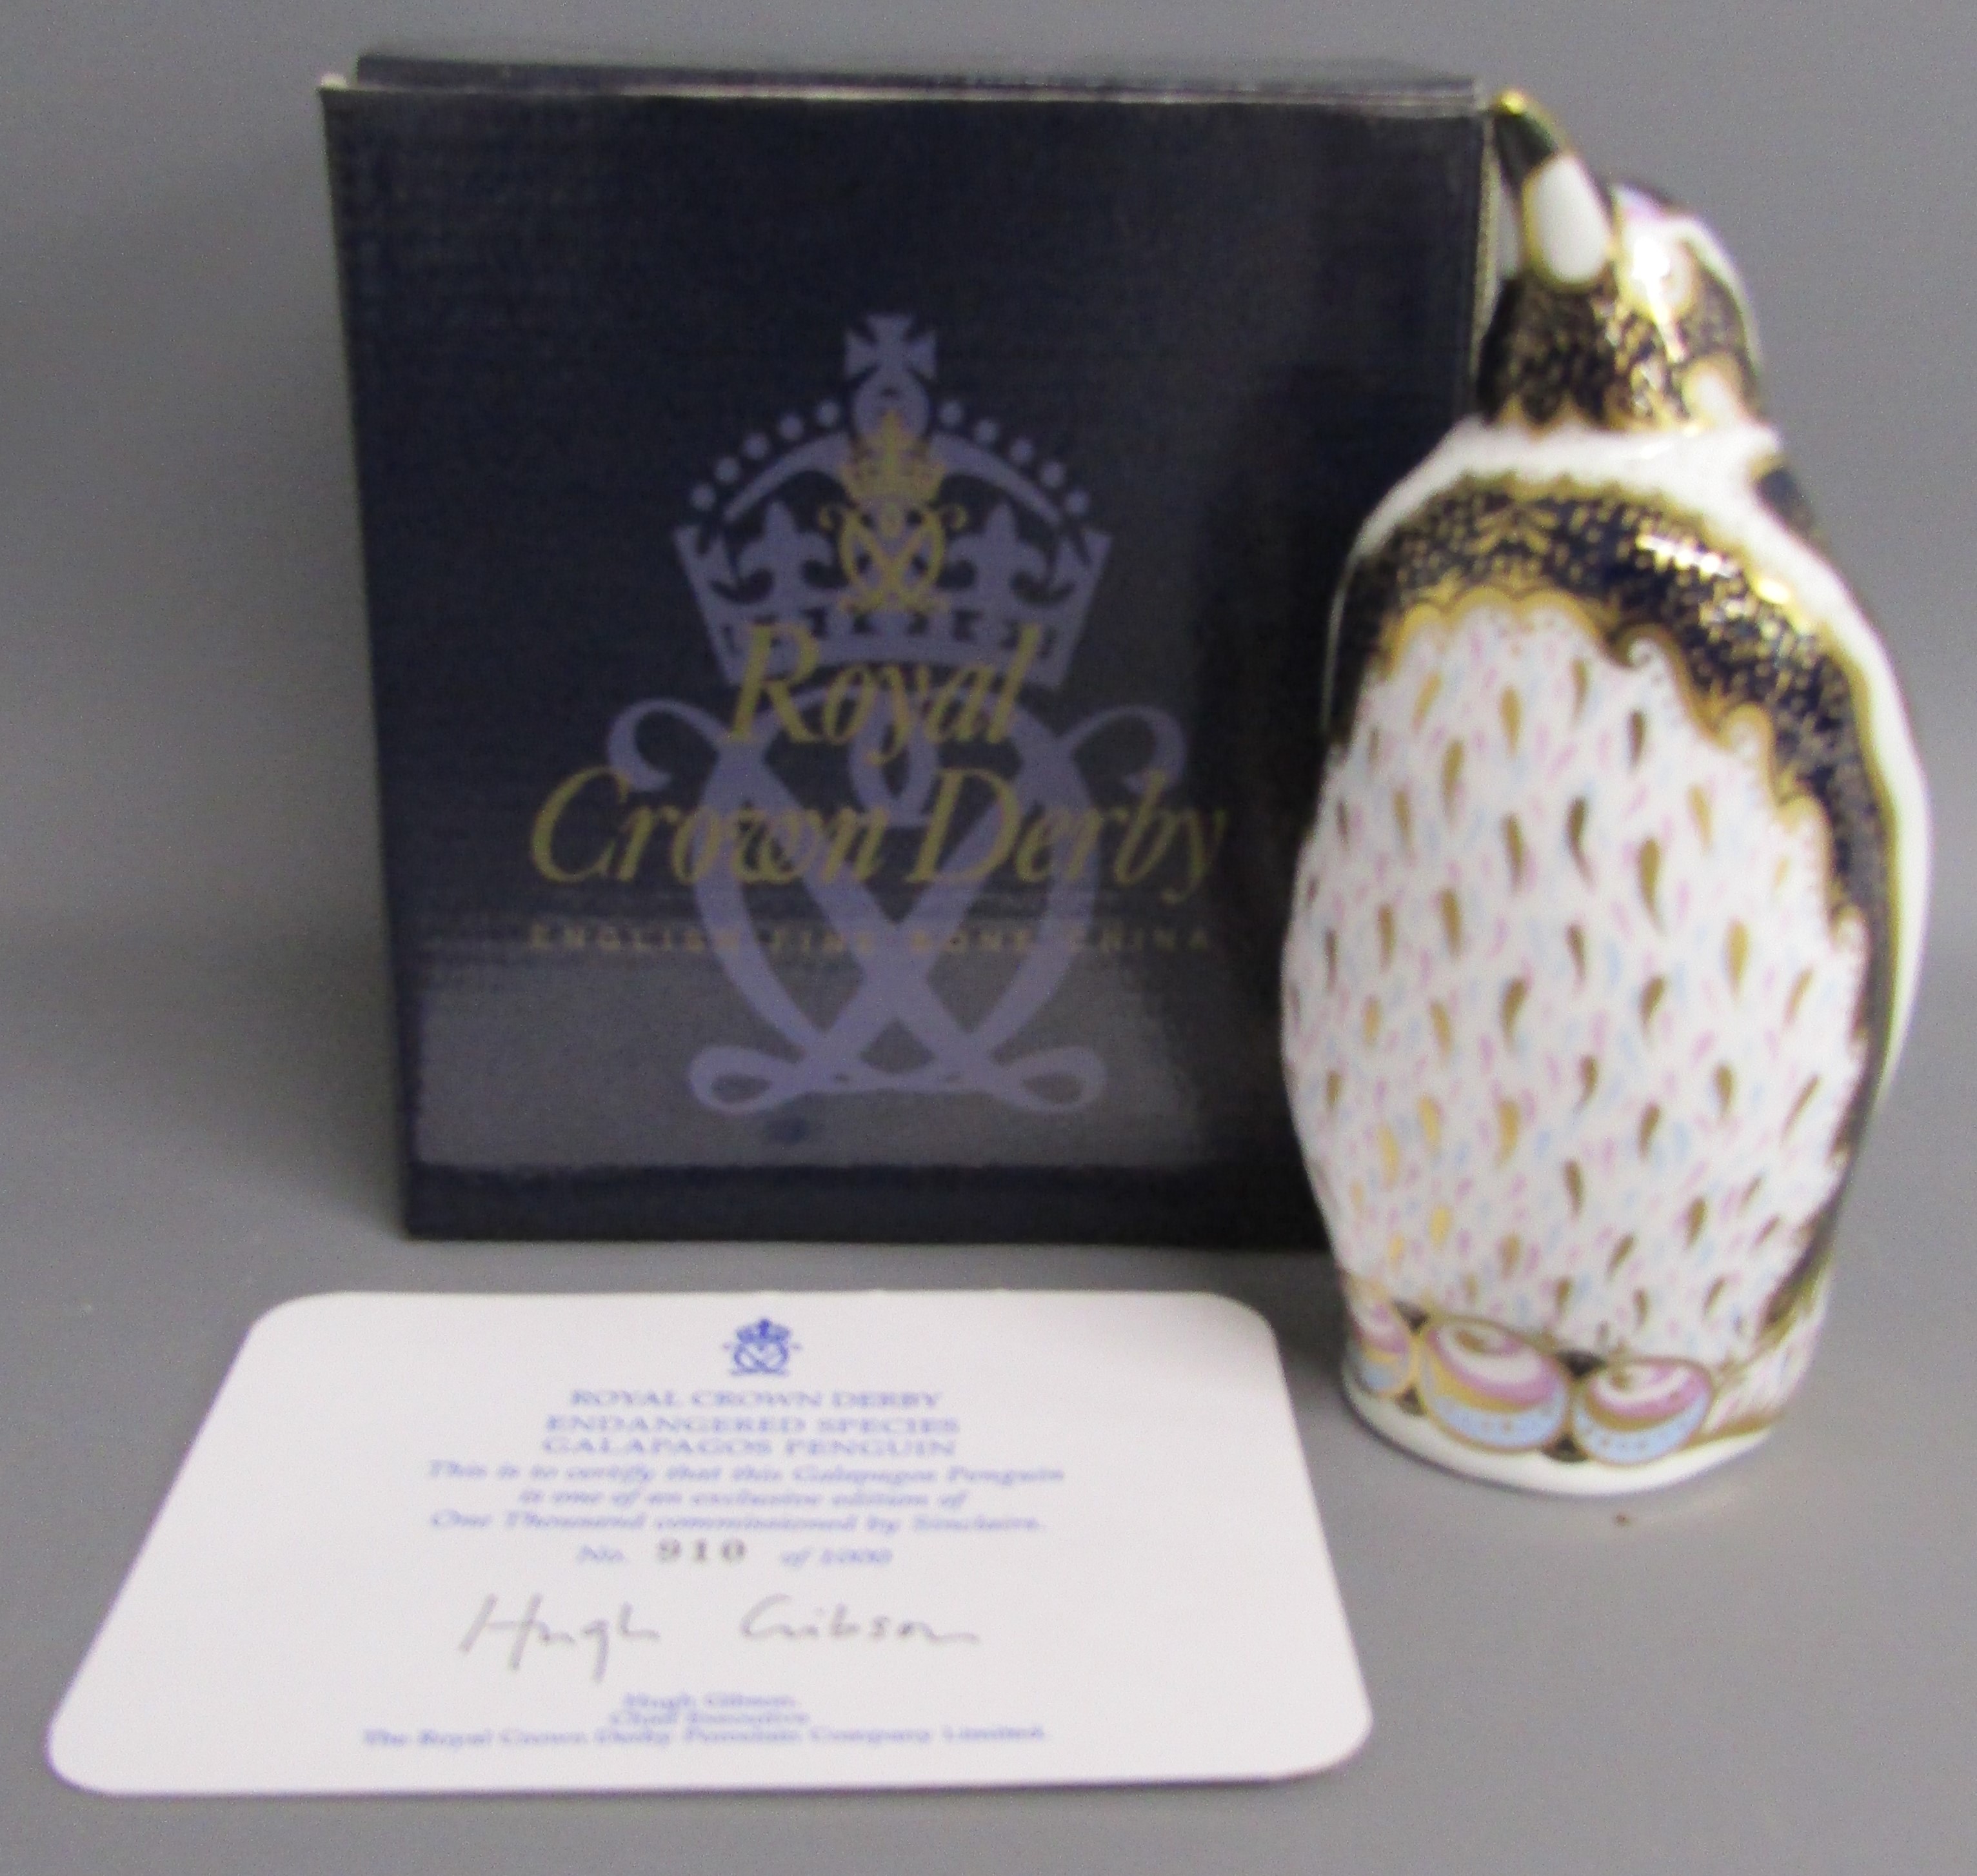 Royal Crown Derby Endangered Species 'Galapagos Penguin' limited edition paperweight 910/1000